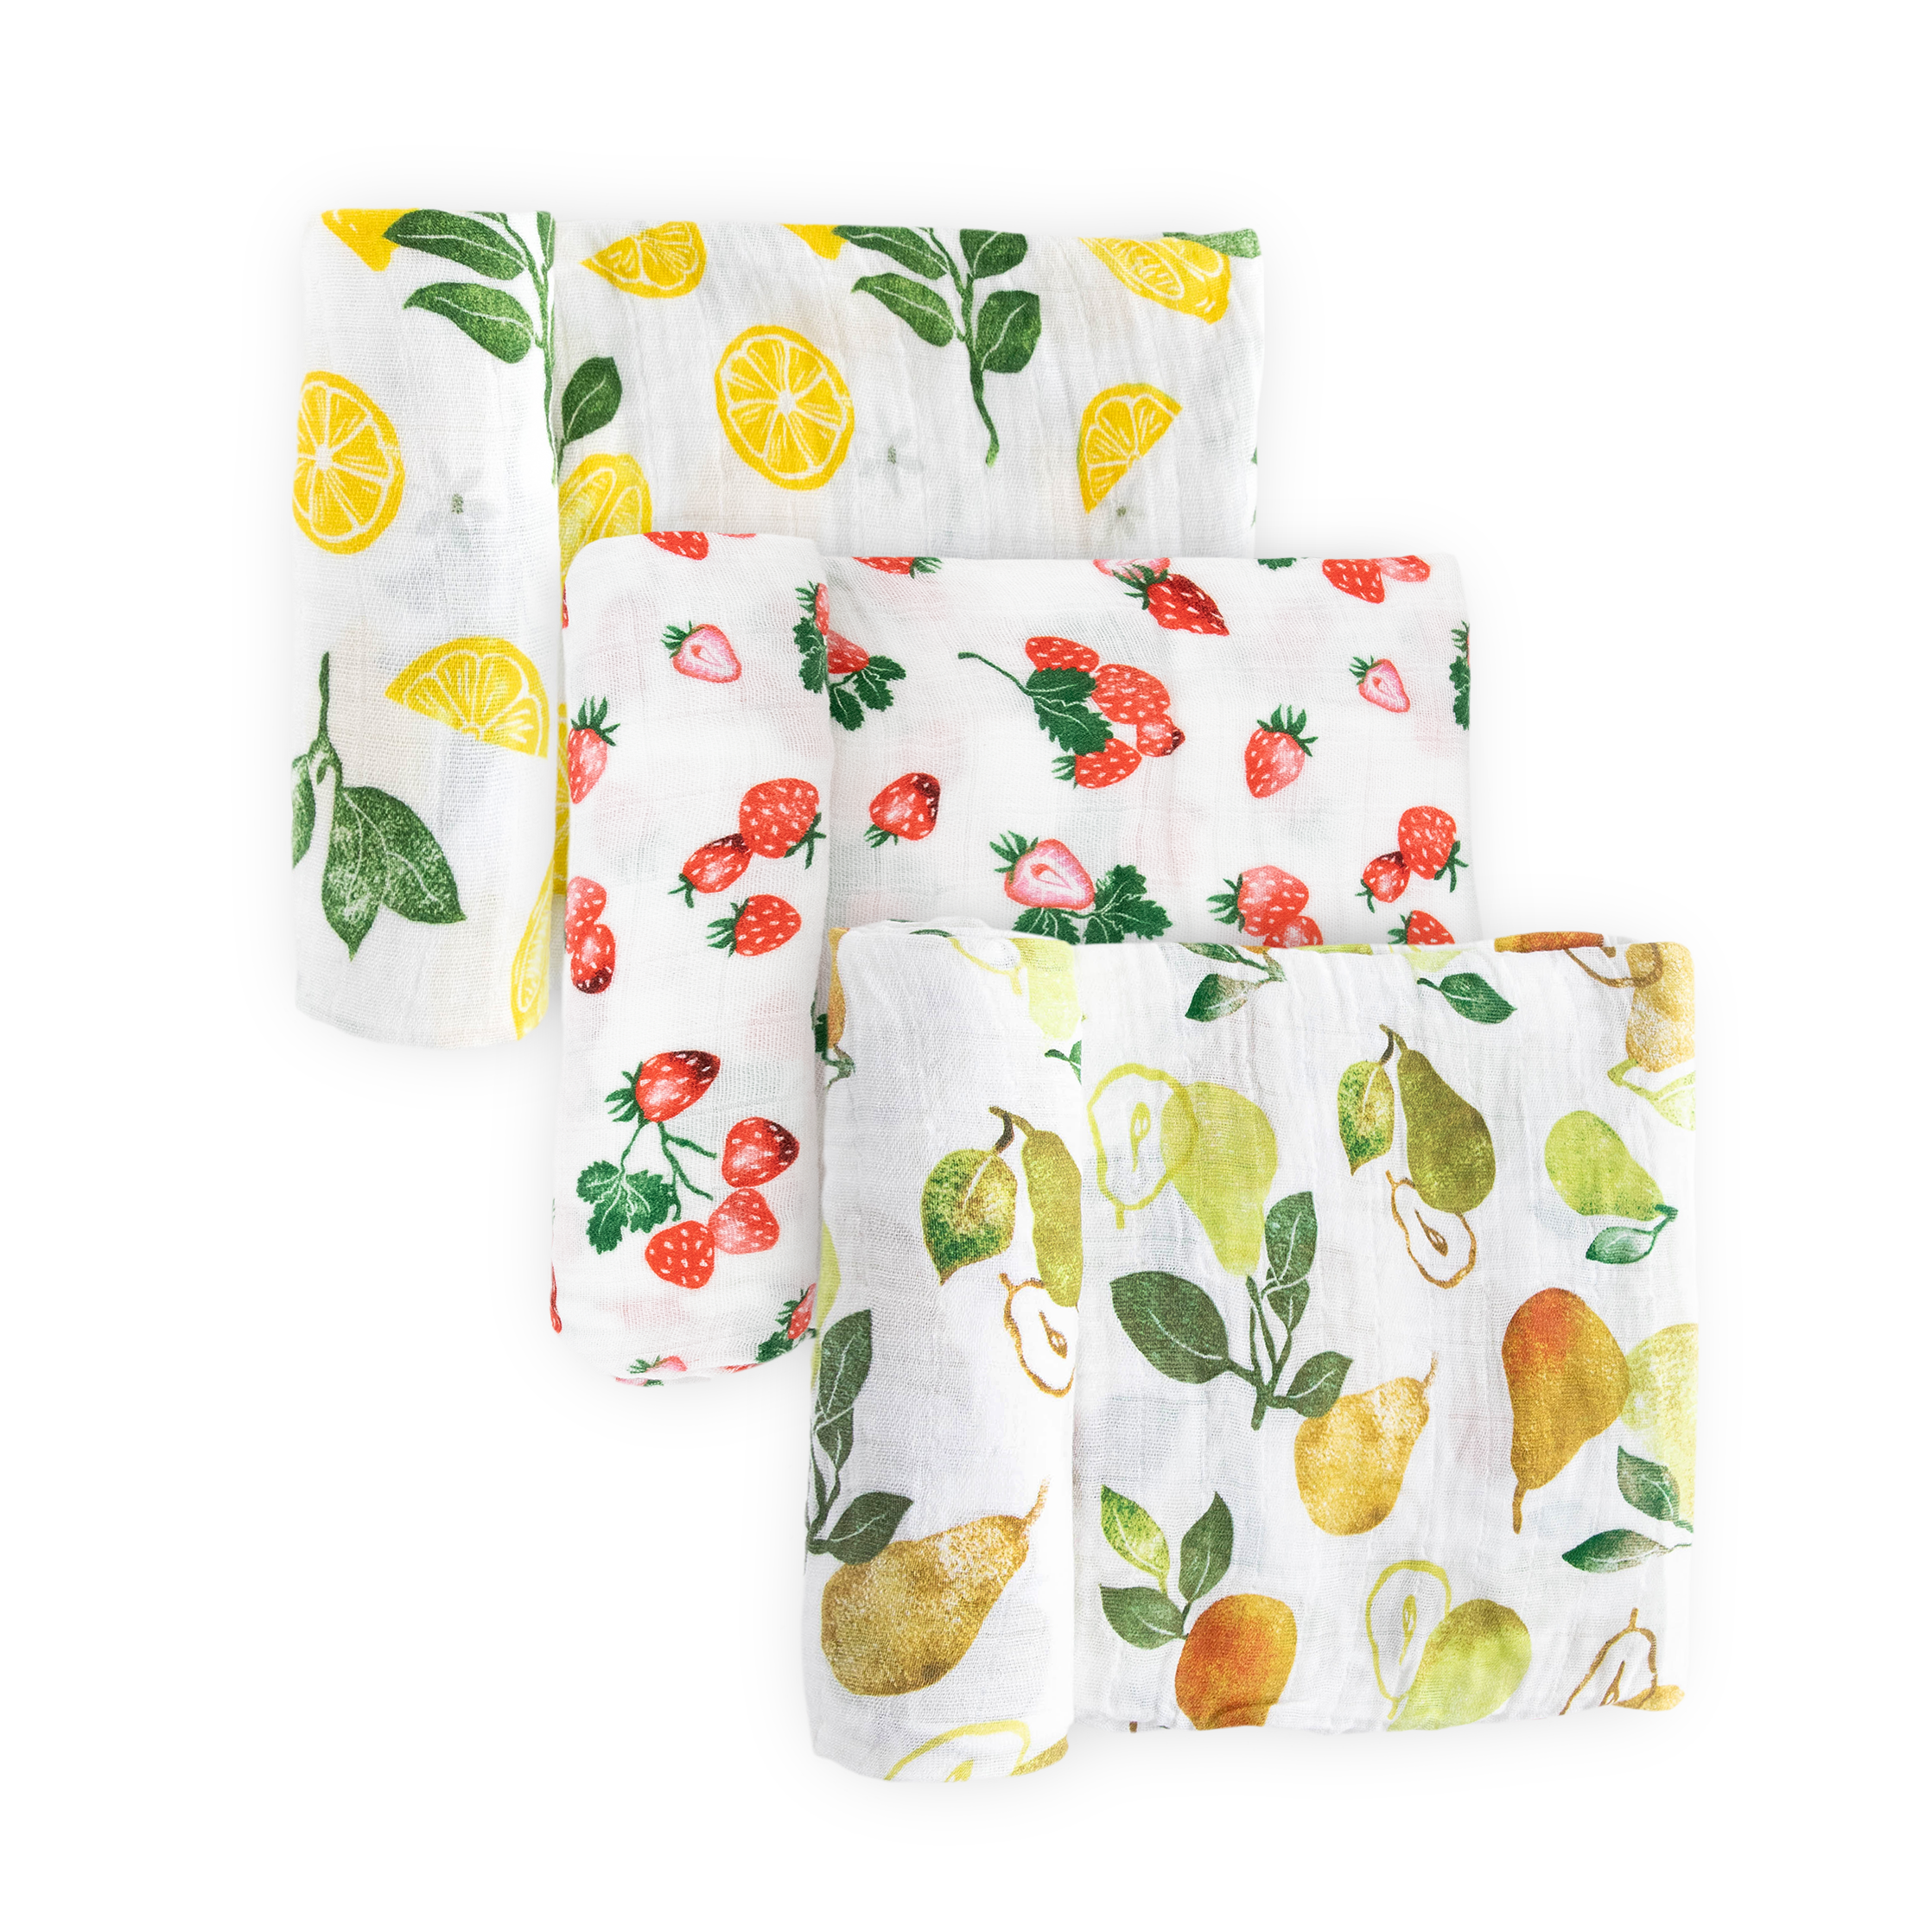 Cotton Muslin Swaddle Blanket 3 Pack - Fruit Stand